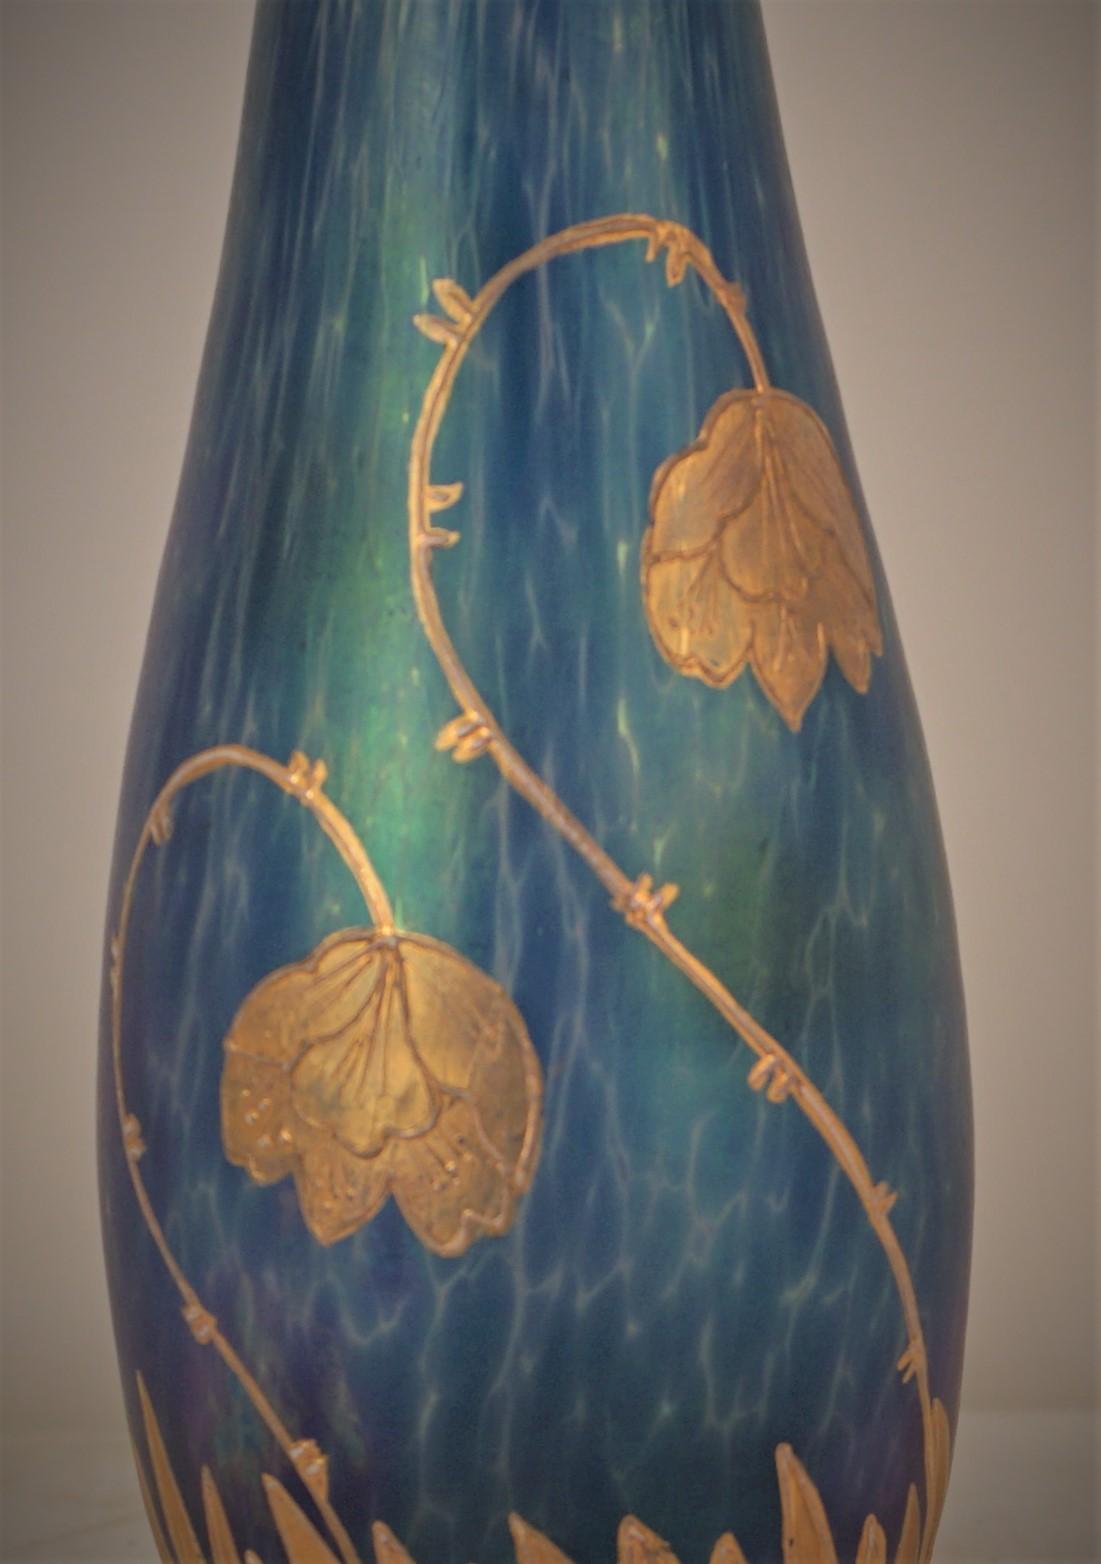 Beautiful blown art glass vase in art nouveau style with gold flora painting. 